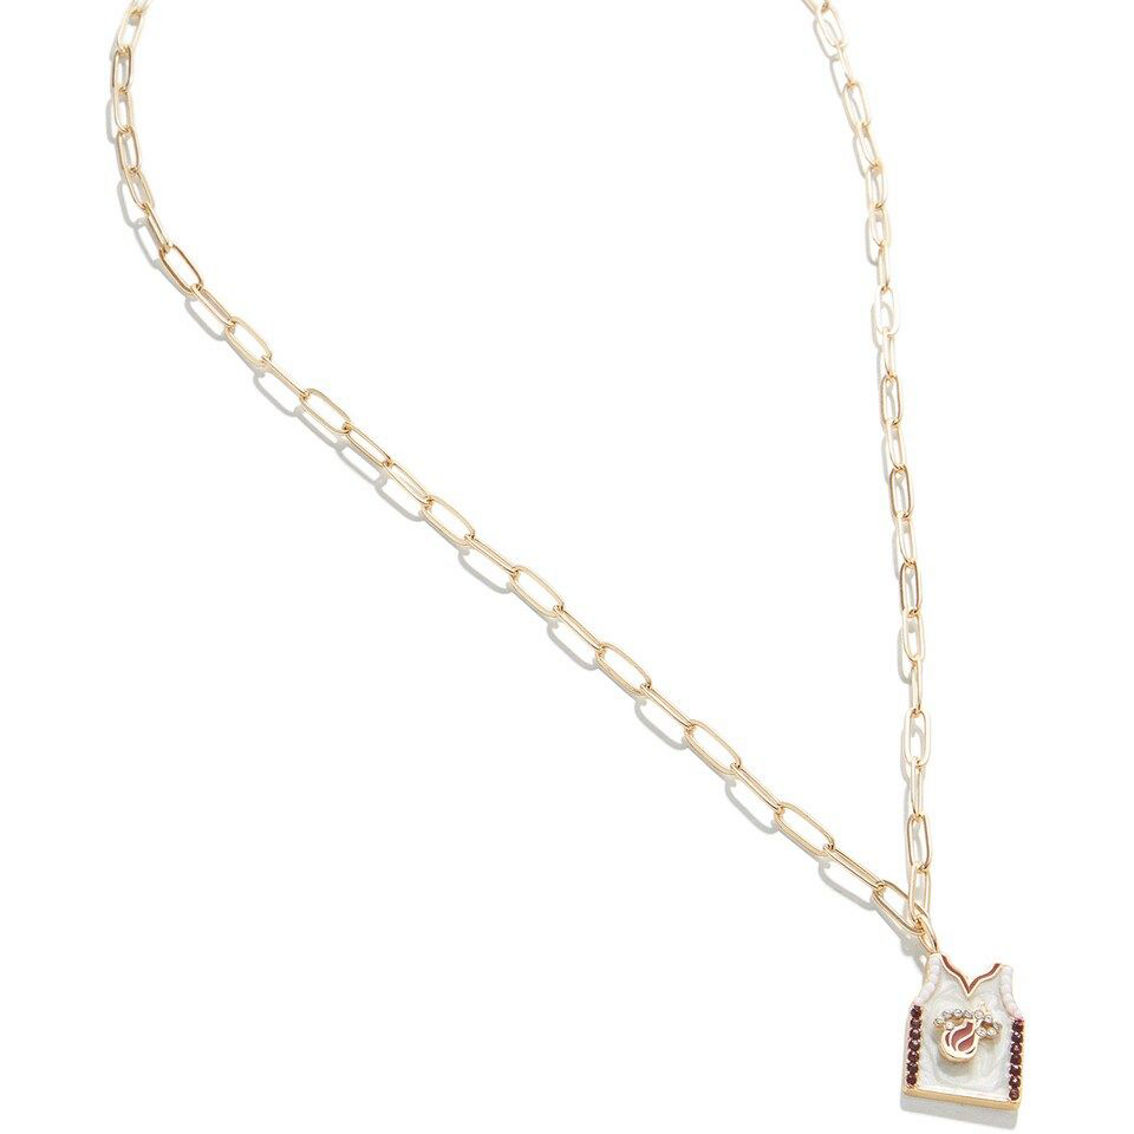 BaubleBar Miami Heat Team Jersey Necklace - Image 2 of 4